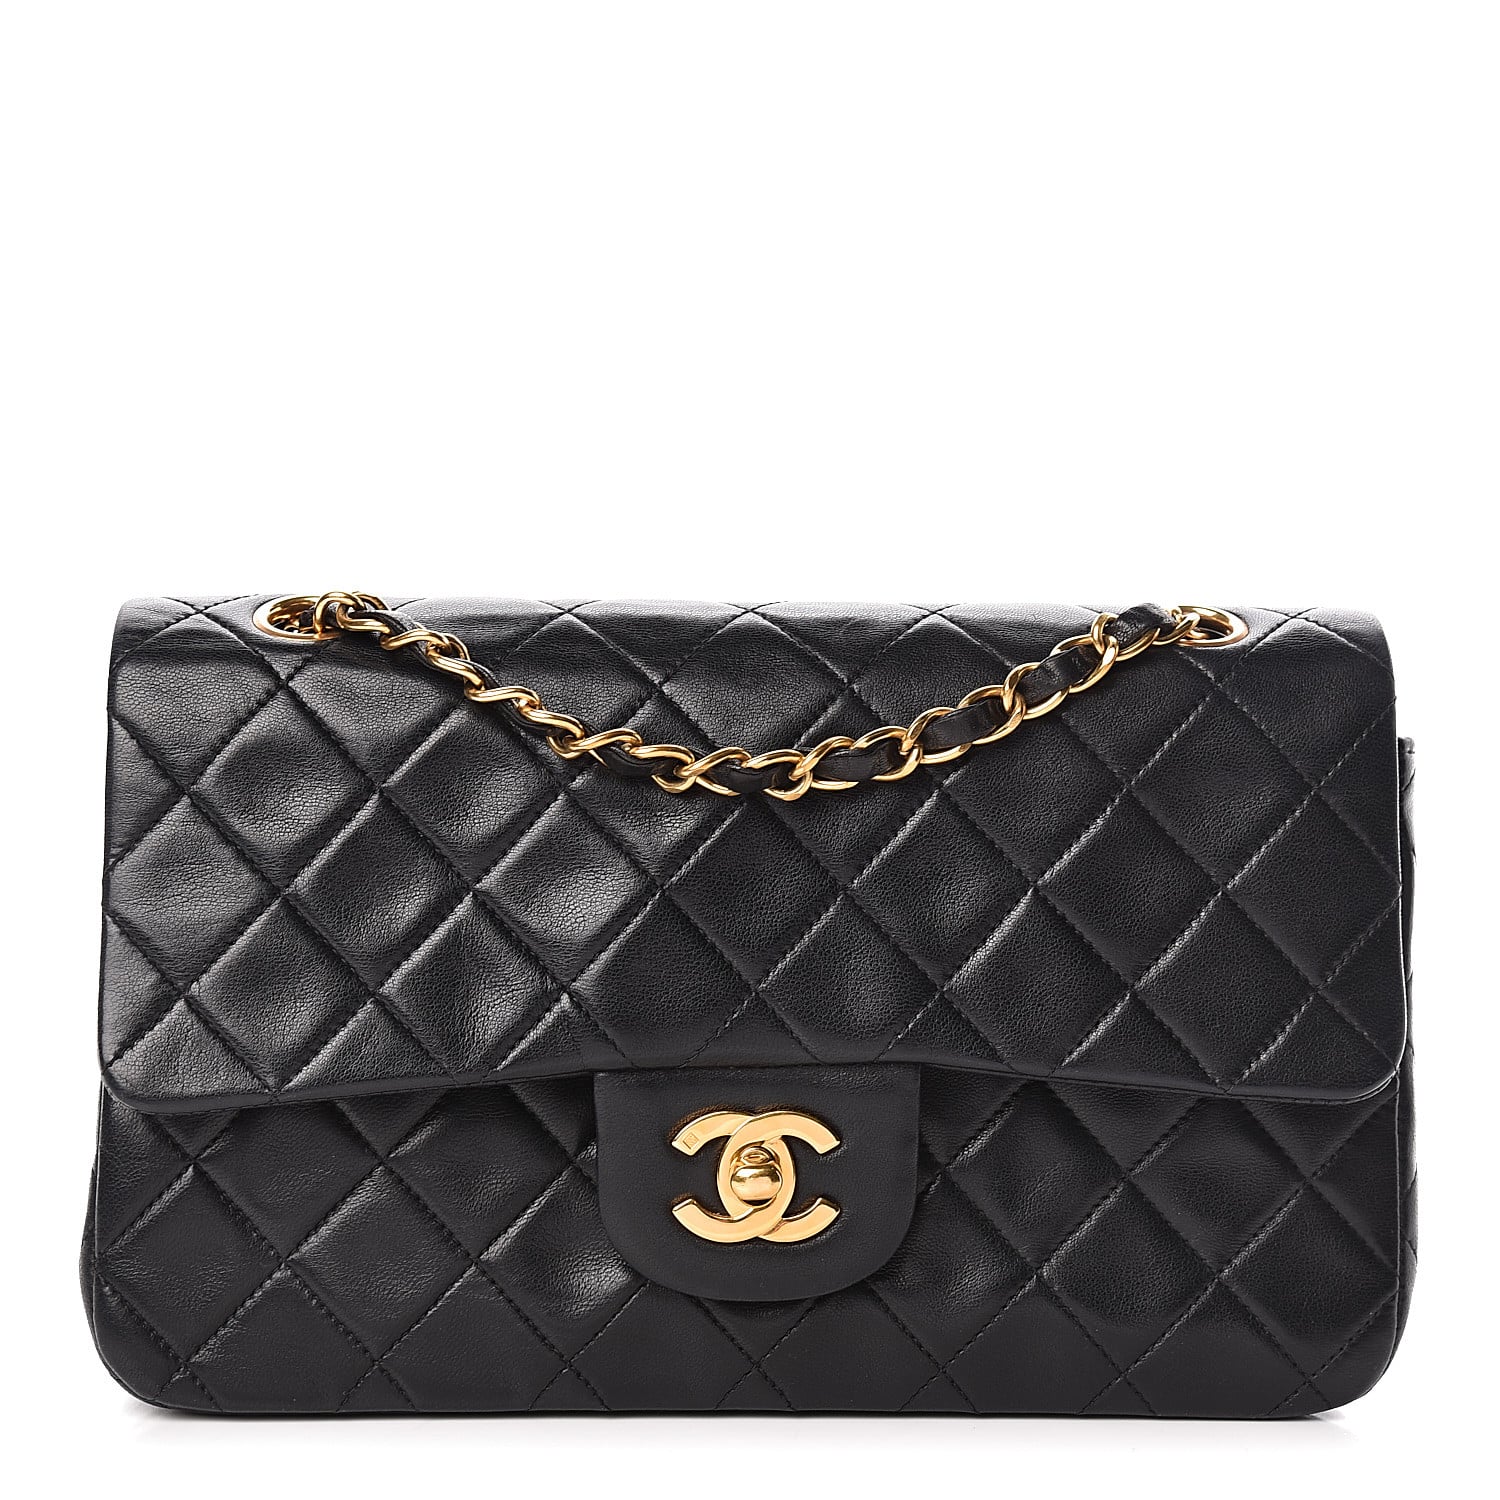 Chanel Bag Outfit Ideas  A Glam Lifestyle  Fashion  Lifestyle Blog